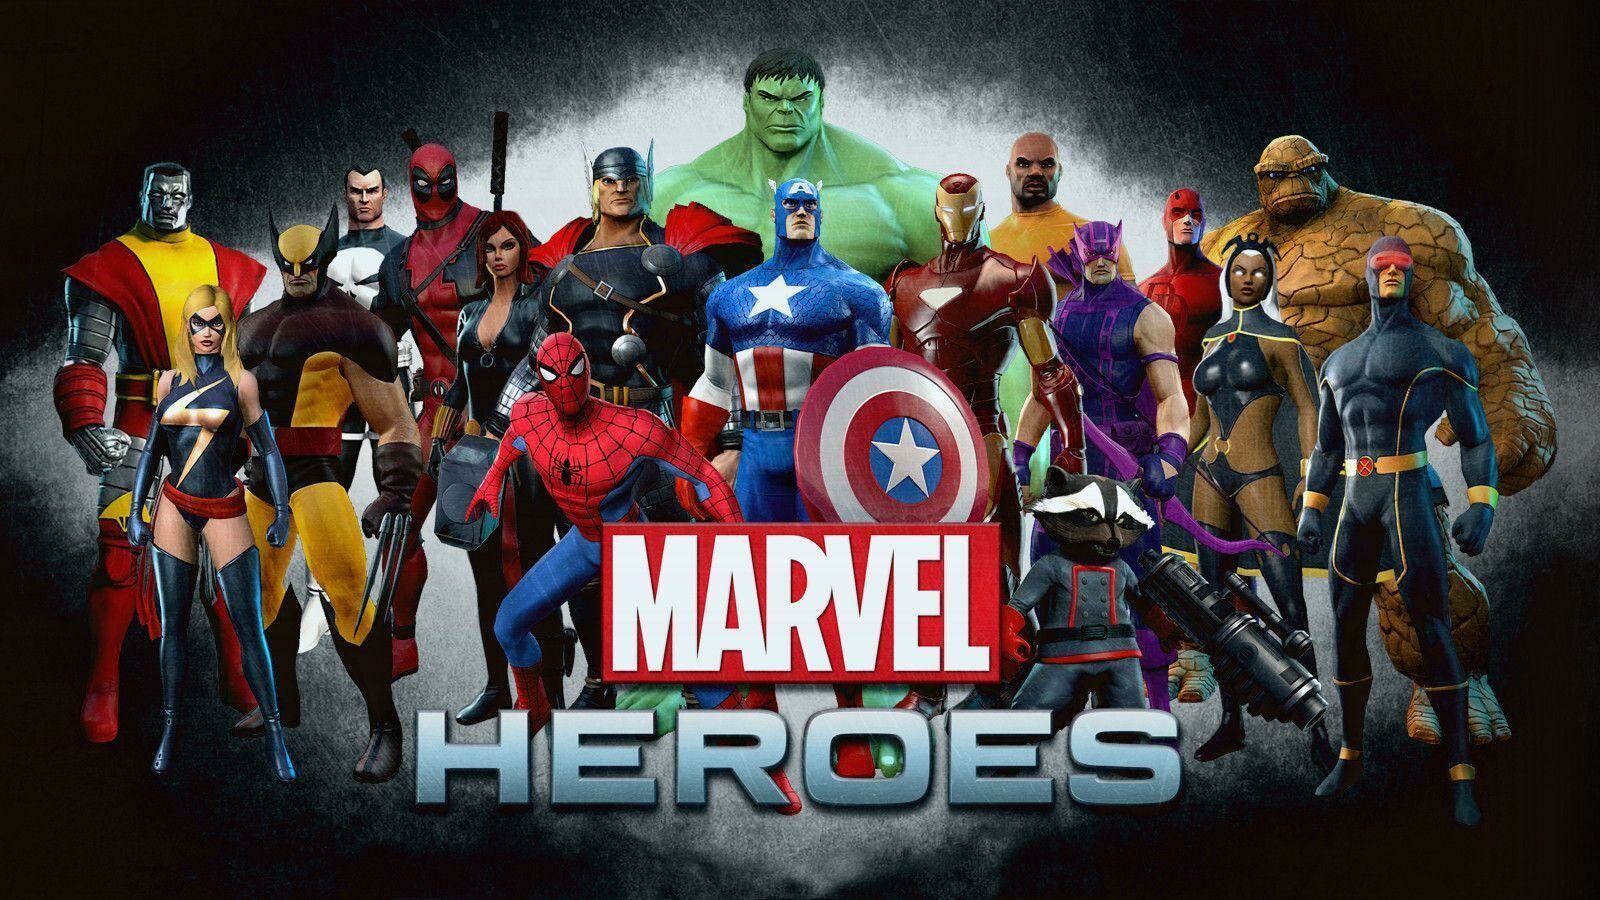 41+ Marvel Heroes Wallpapers: HD, 4K, 5K for PC and Mobile | Download free  images for iPhone, Android